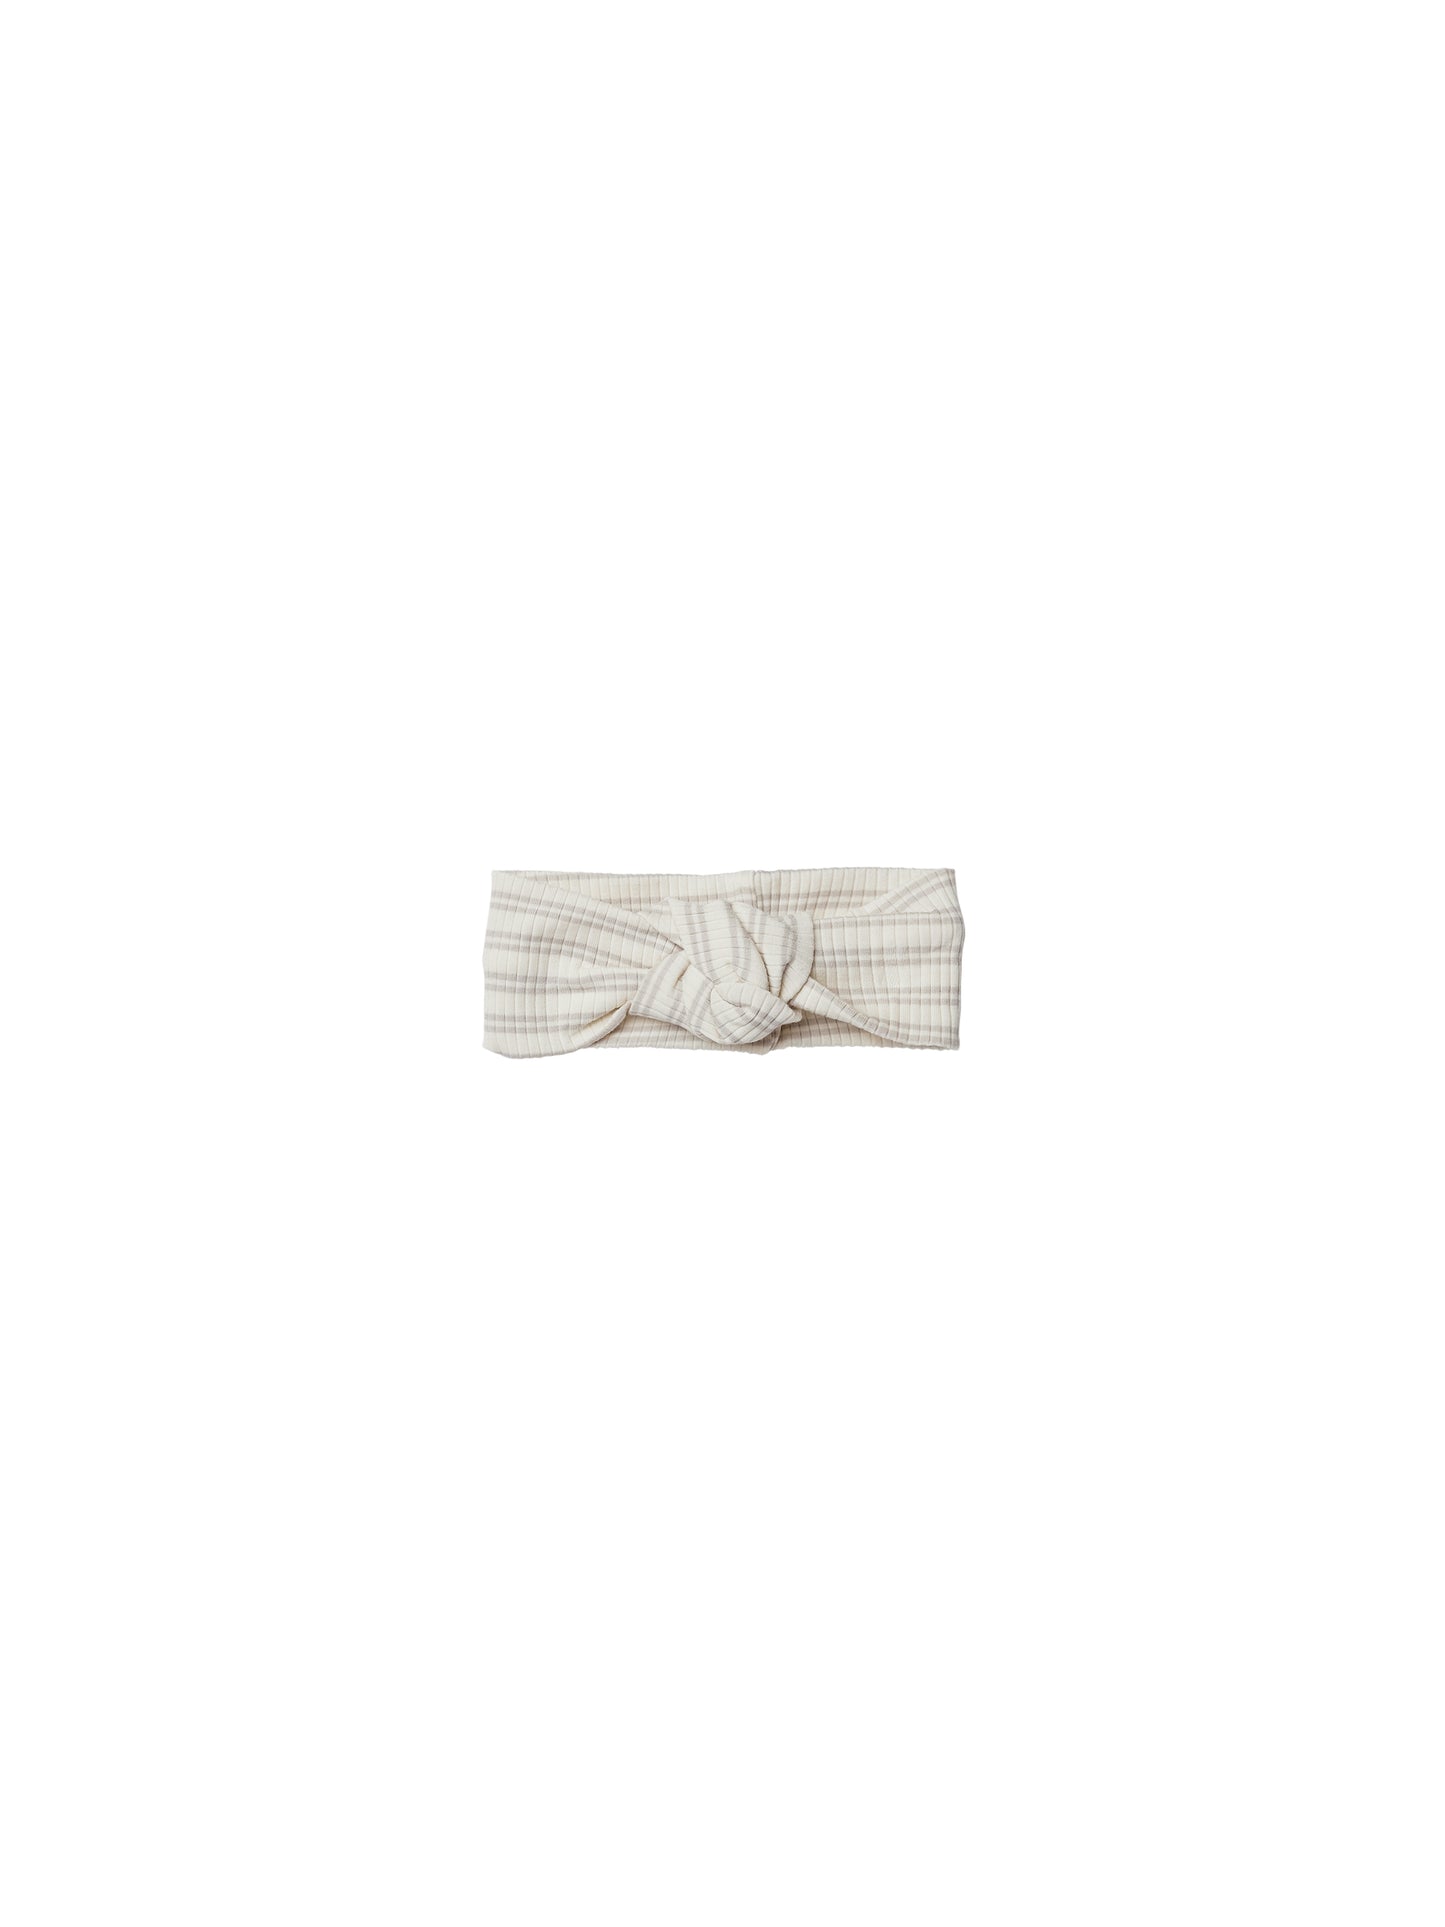 Ribbed Knotted Headband | Silver Stripe